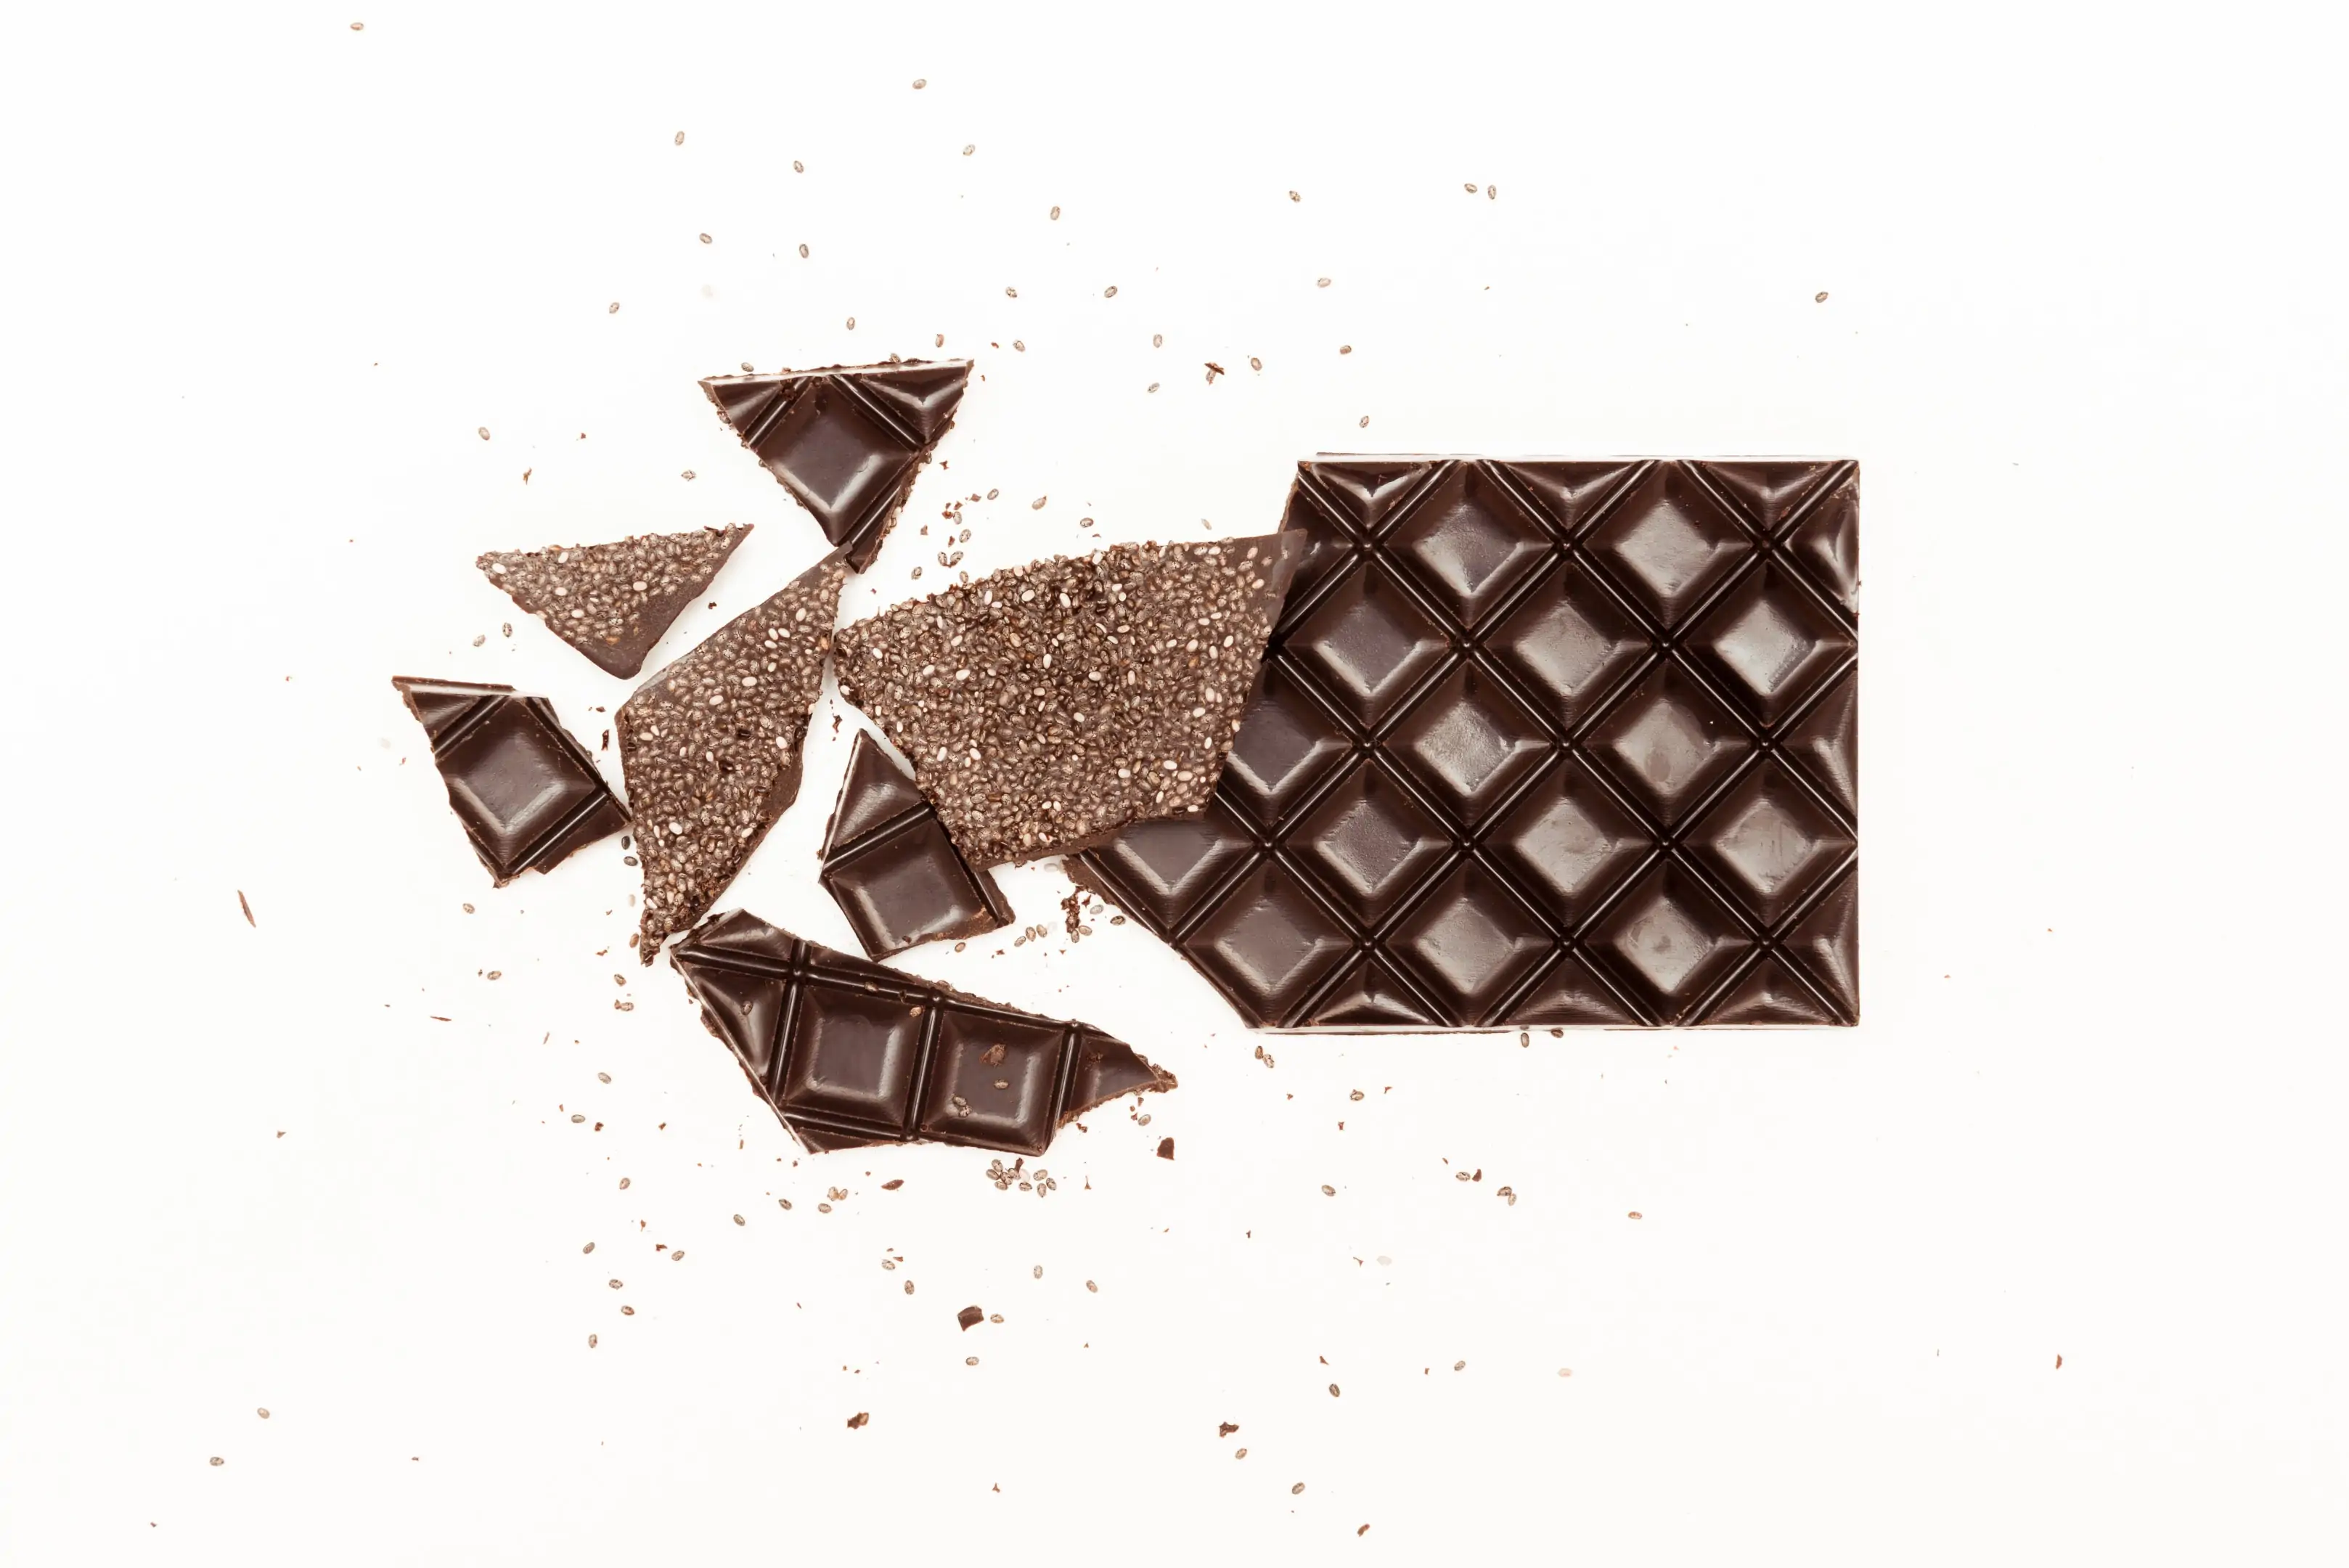 Cracked dark chocolate bar with chia seeds on white background